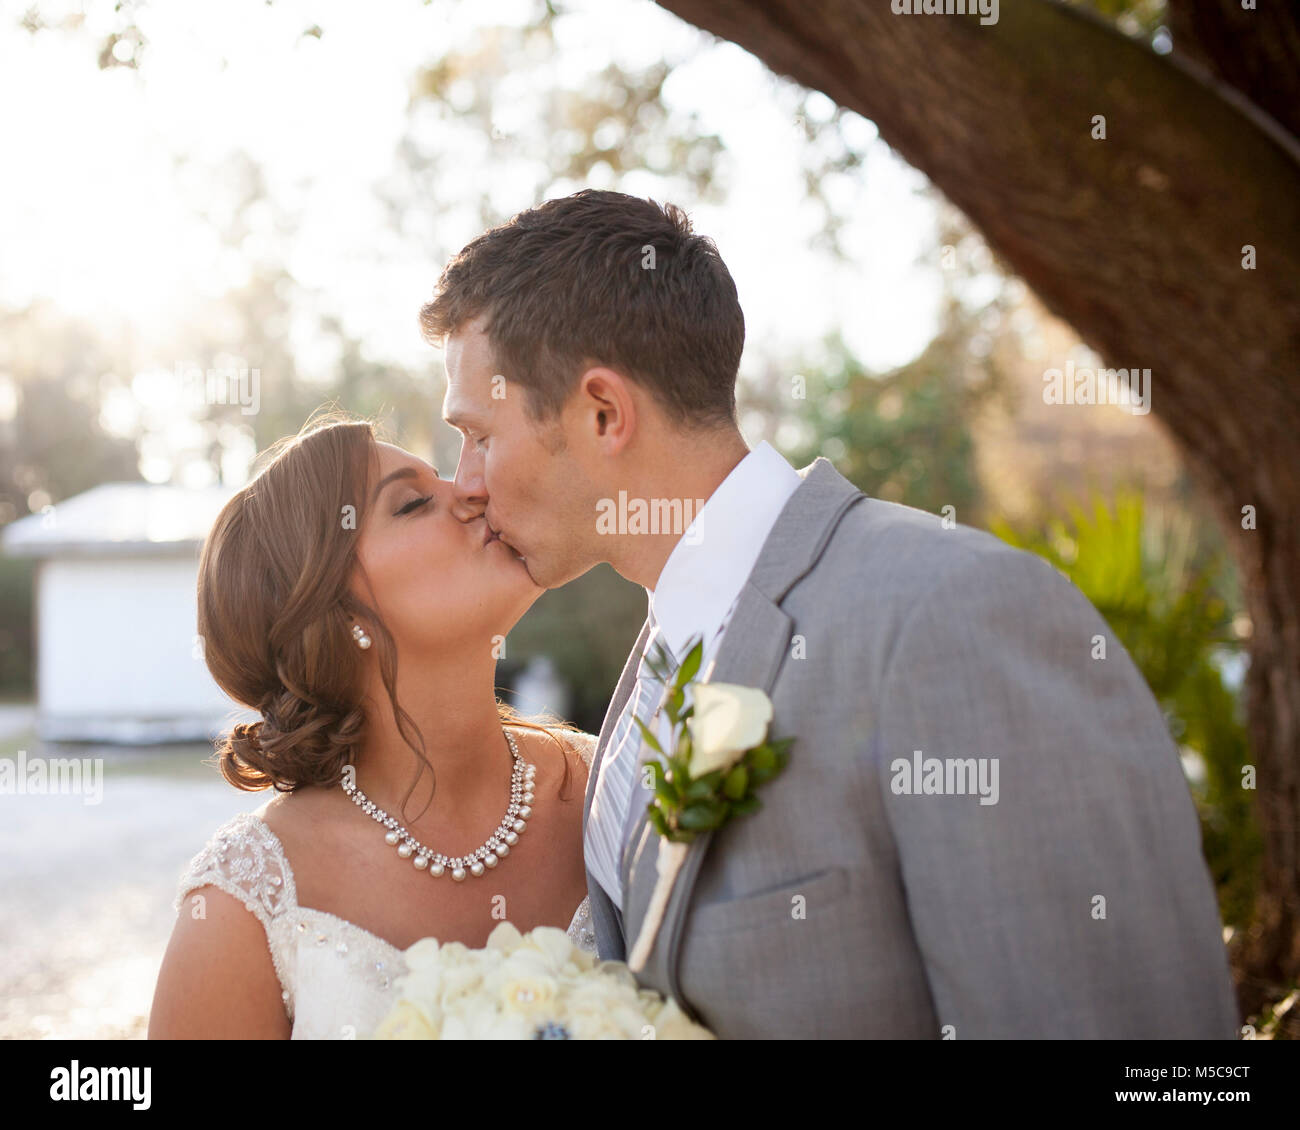 Young newly married couple kissing outdoors Stock Photo - Alamy